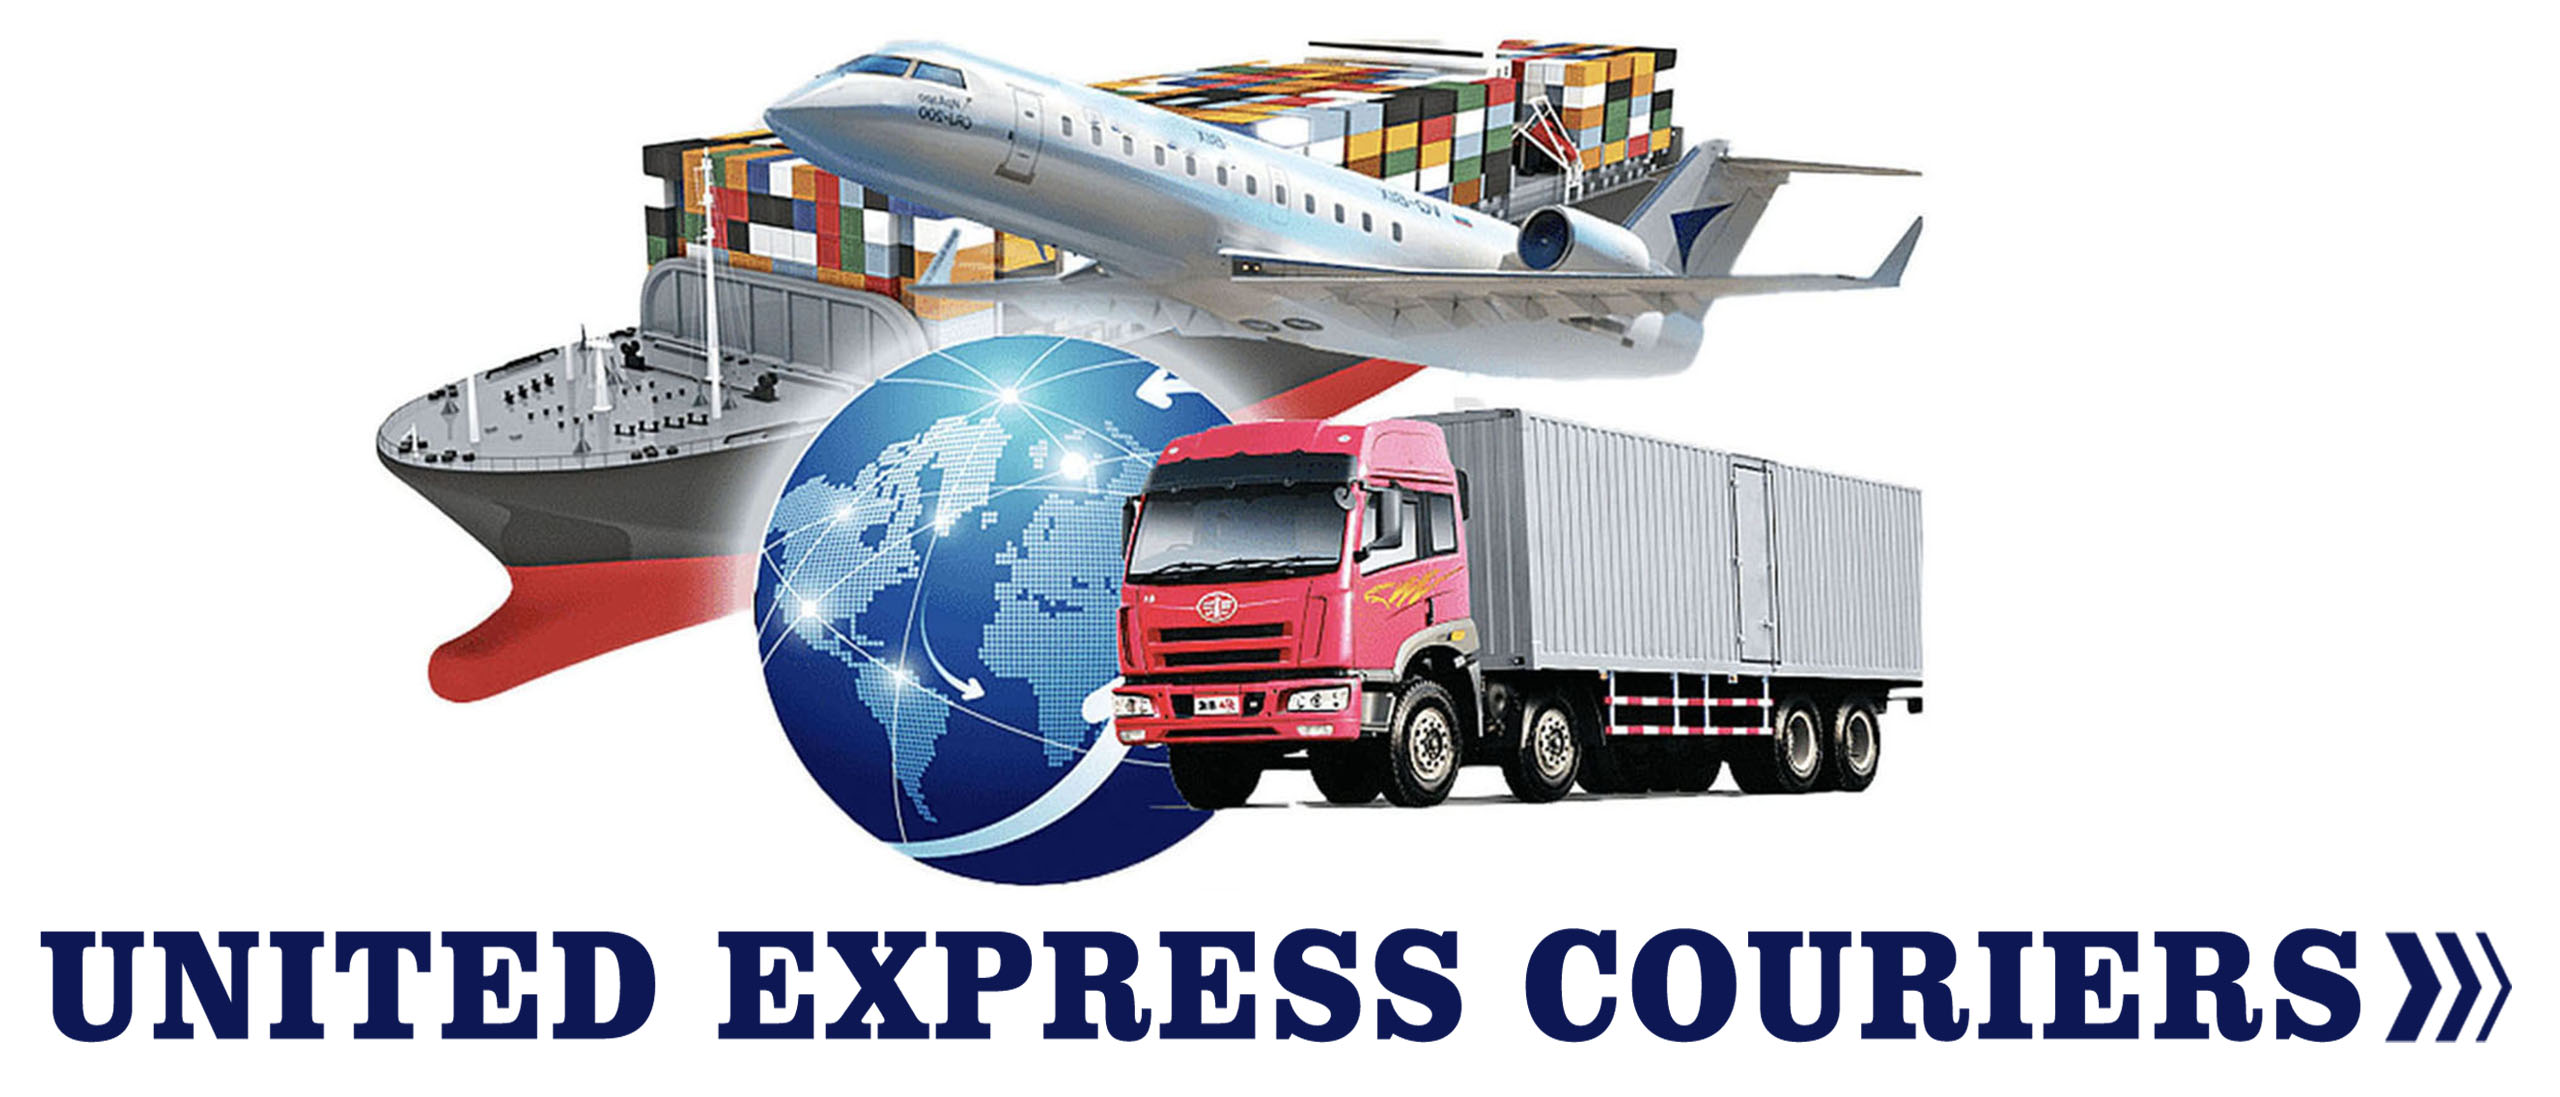 United Express Couriers